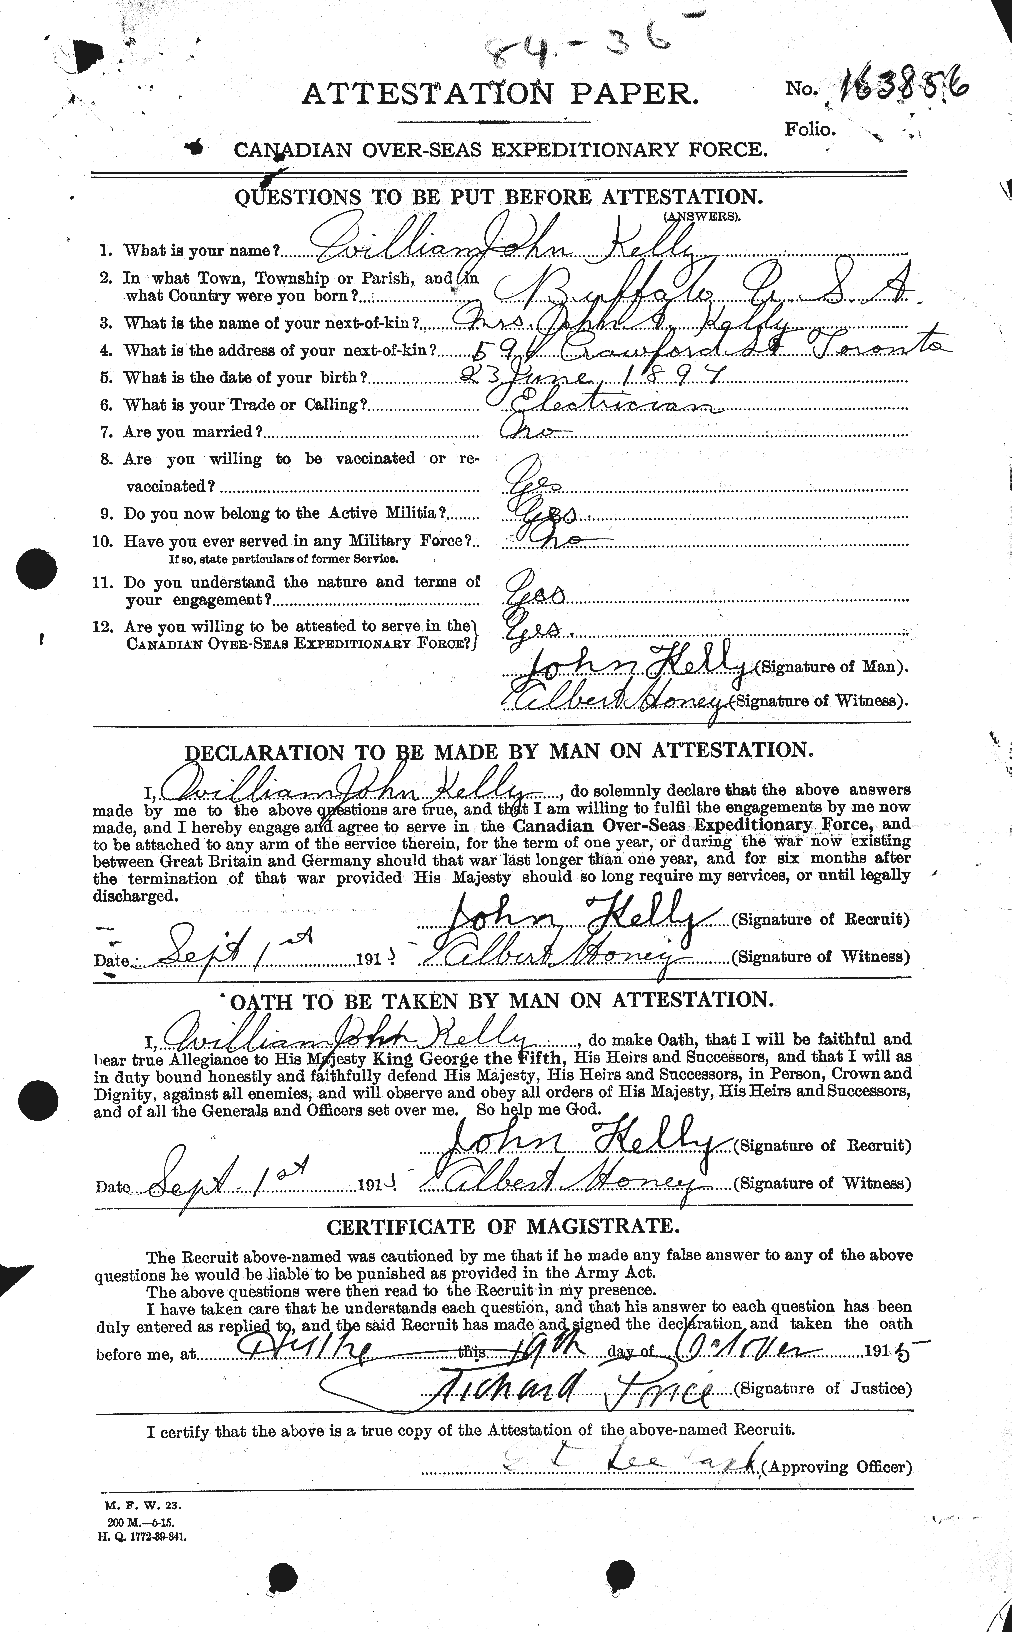 Personnel Records of the First World War - CEF 429851a